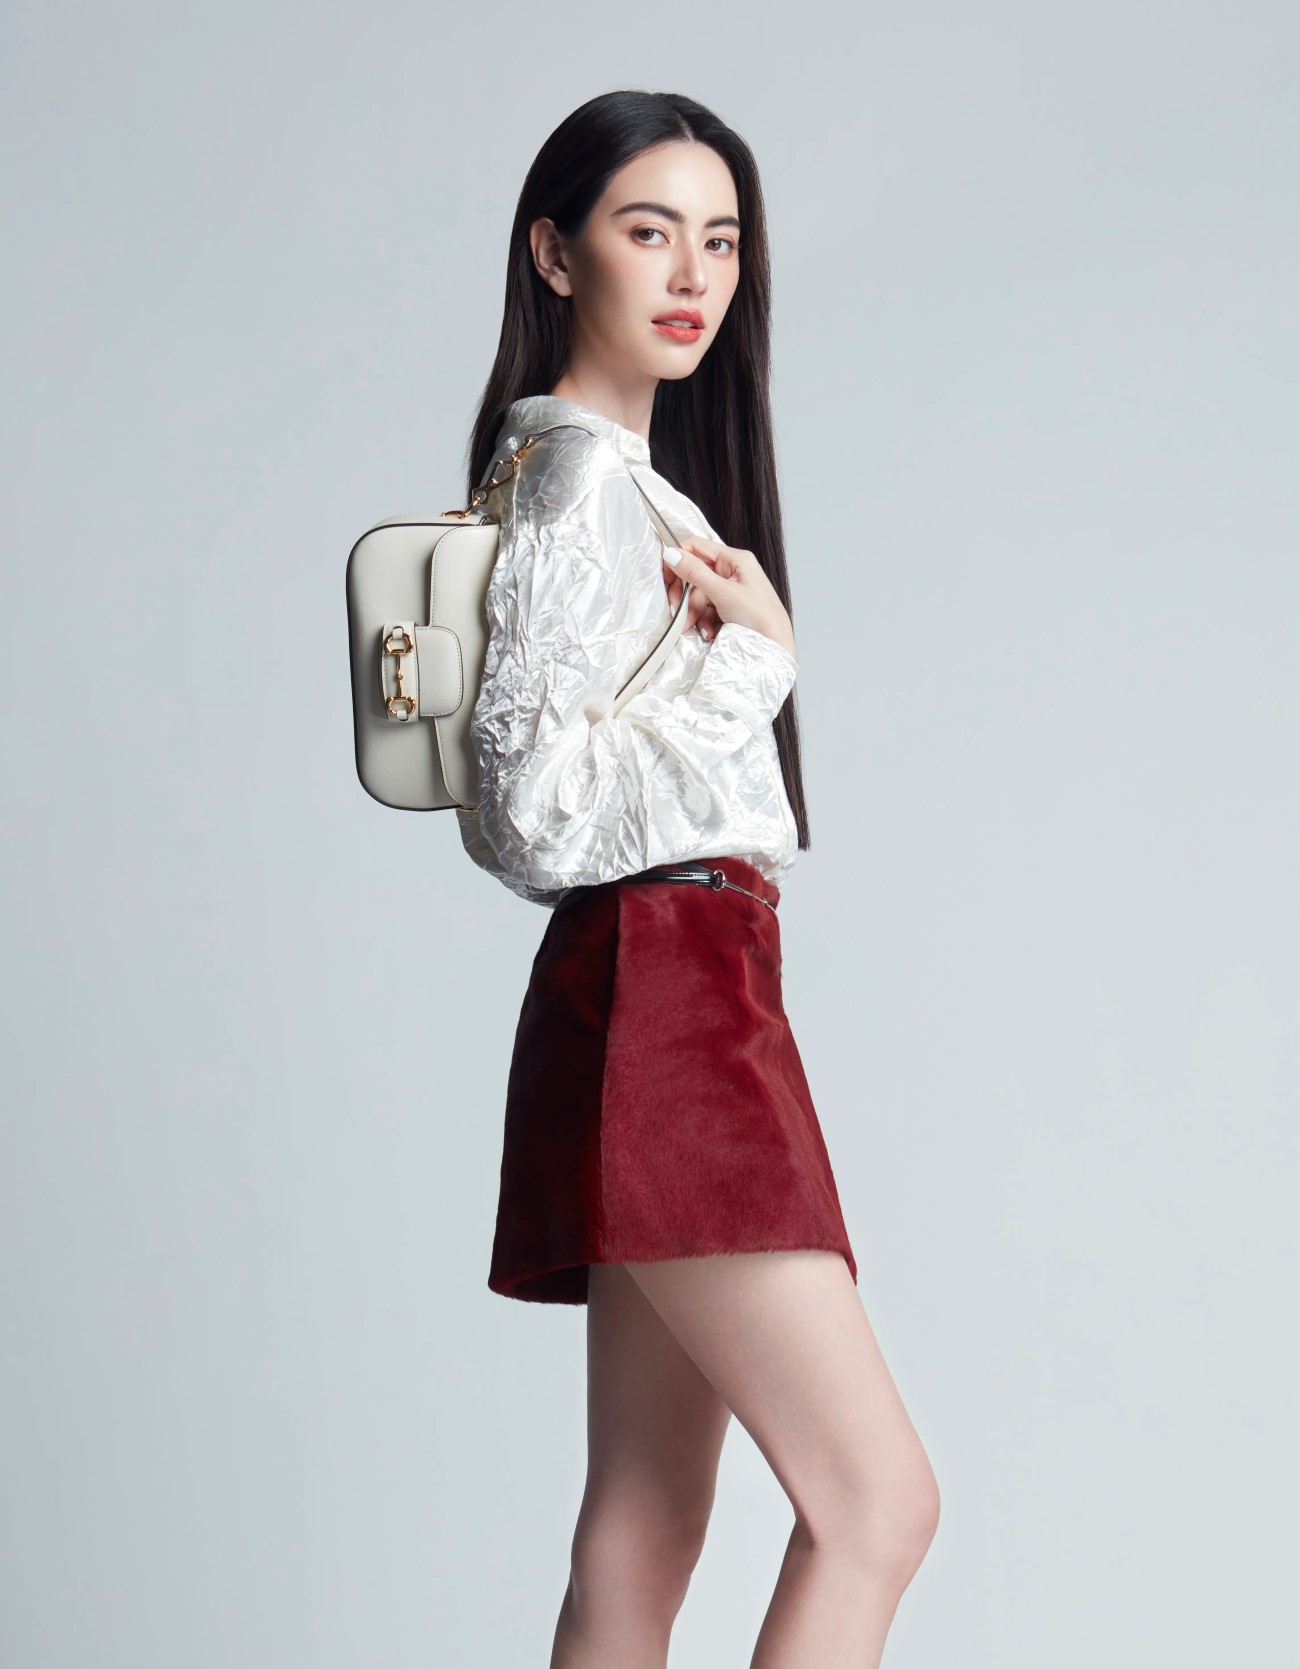 Davika Hoorne is the first Thai brand ambassador for Gucci and Gucci Beauty